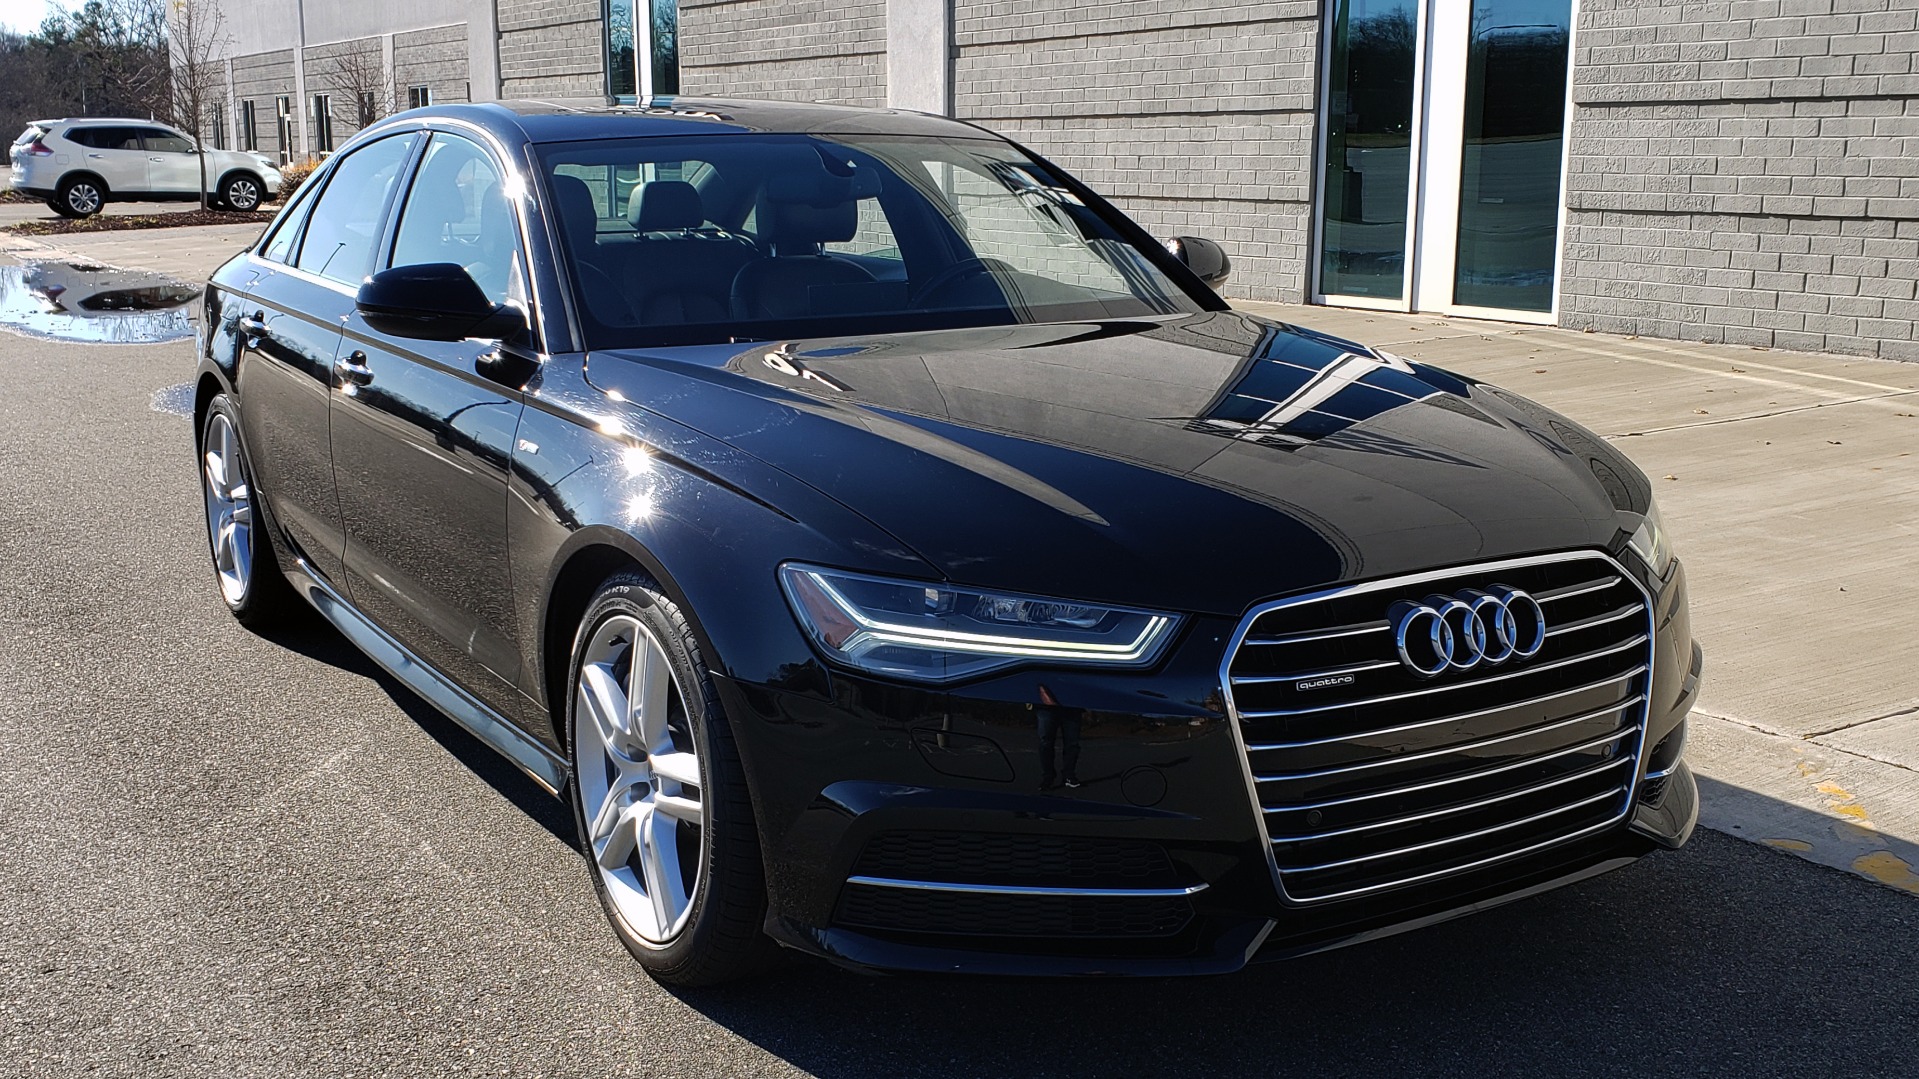 Used 2016 Audi A6 2.0T PREMIUM PLUS / NAV / S-LINE / CLD WTHR / SUNROOF for sale Sold at Formula Imports in Charlotte NC 28227 4